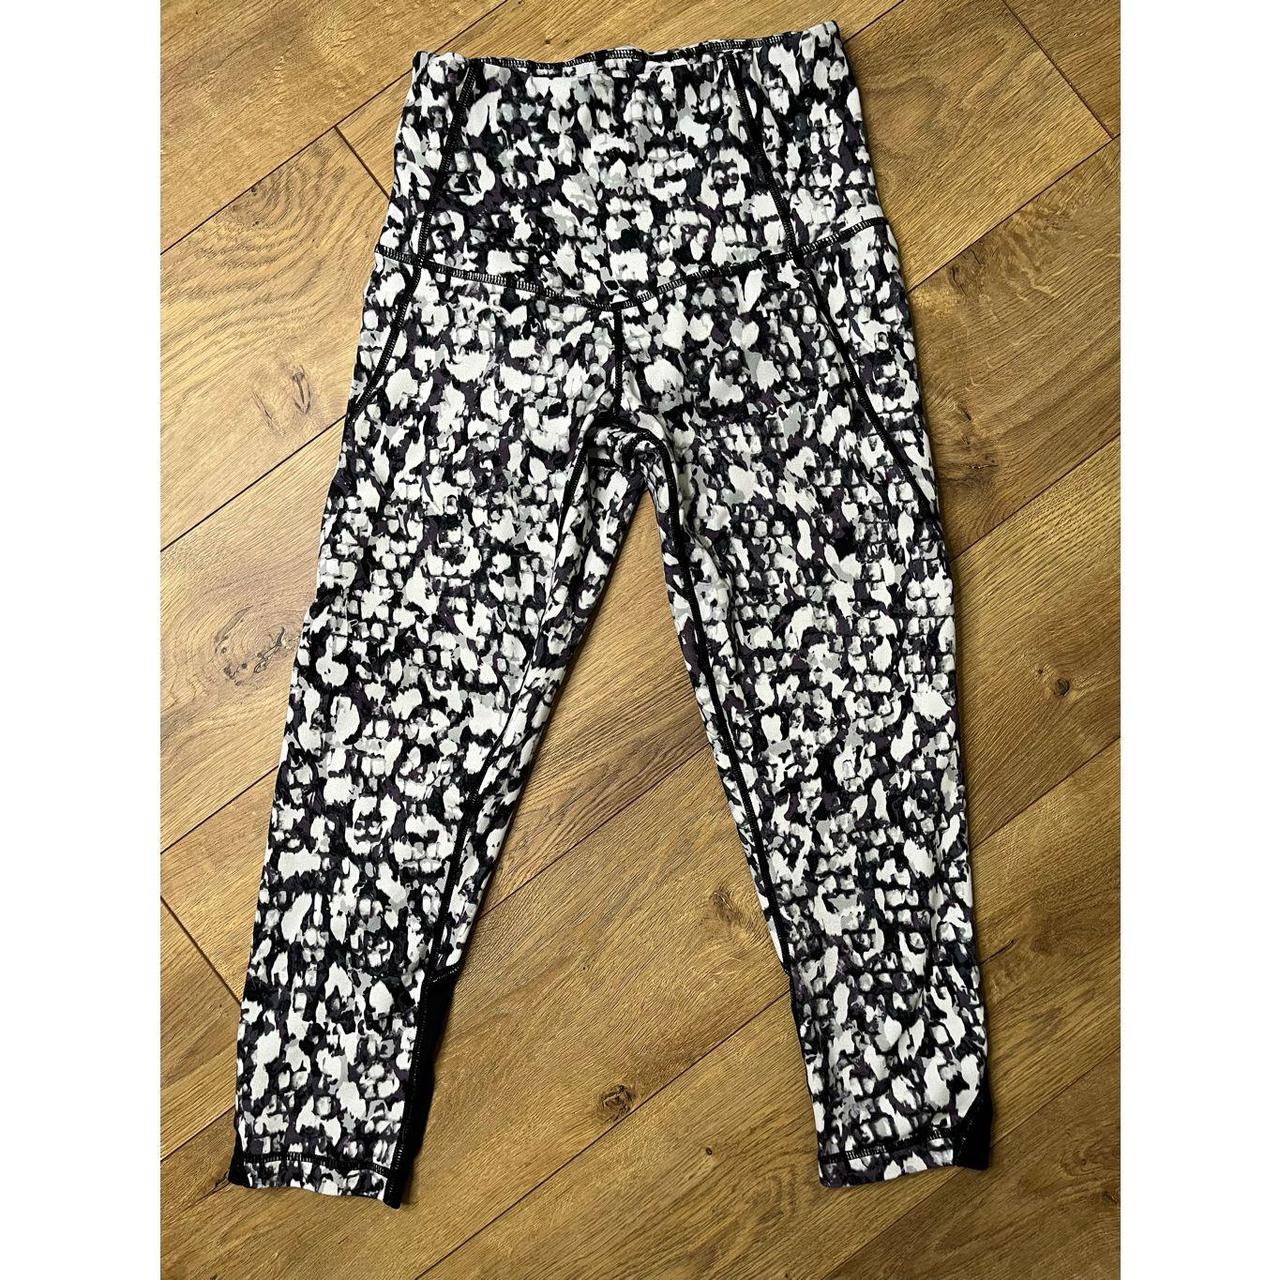 Product Image 1 - Women’s Zella Black and White